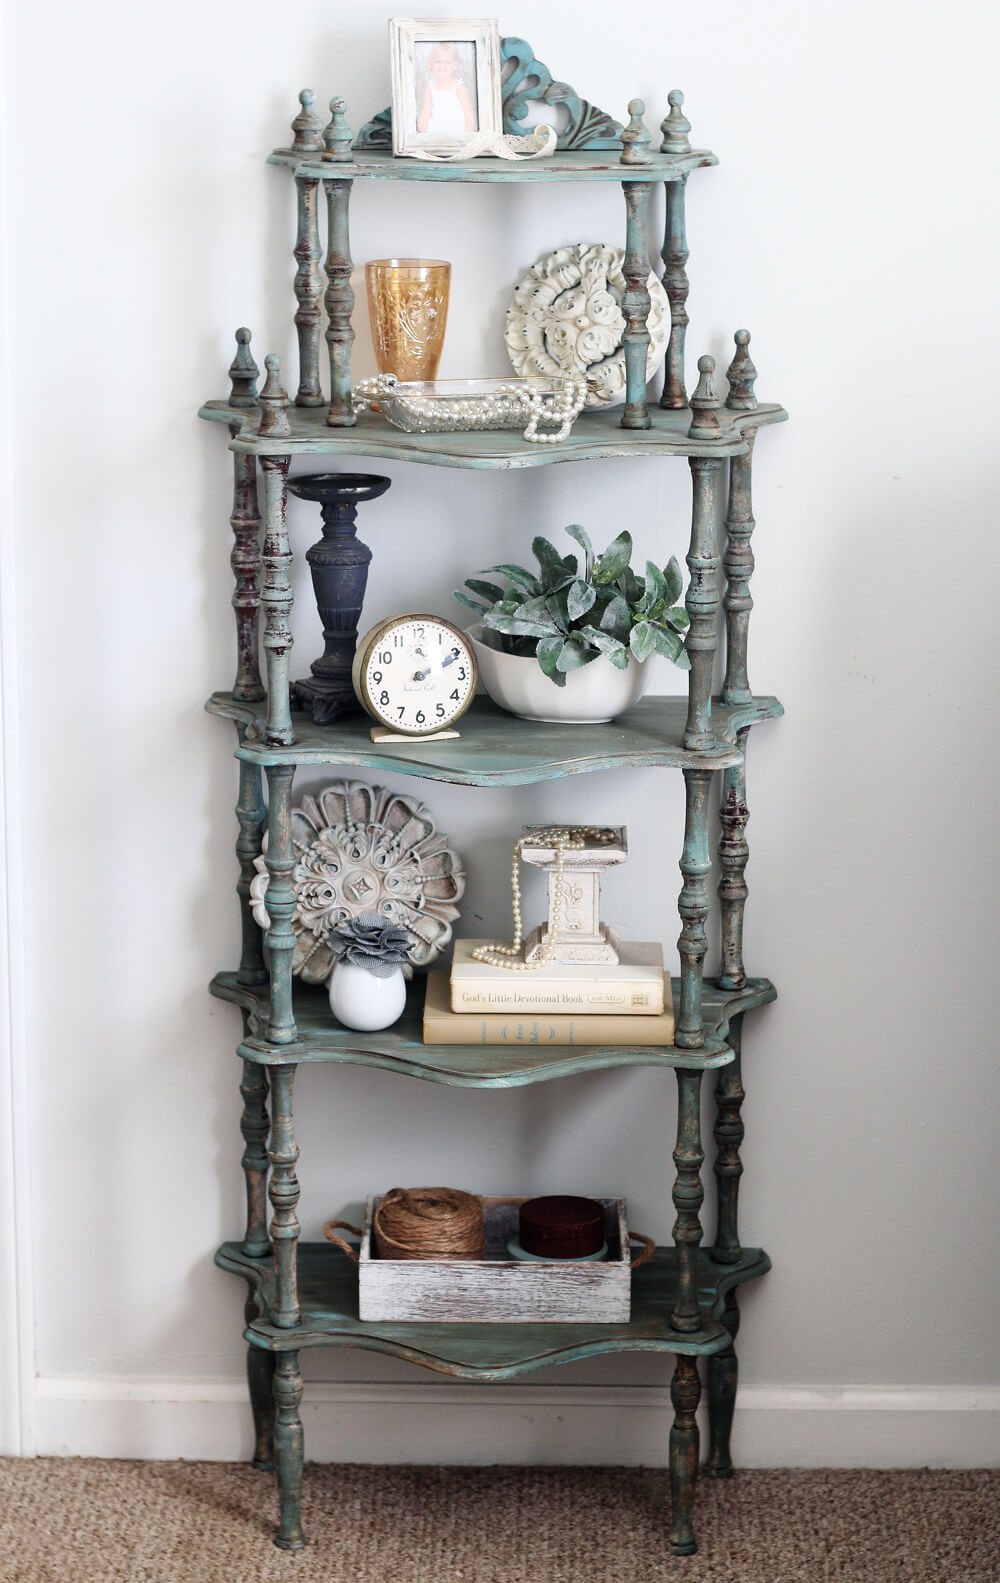 Makeover a Vintage Shelf with Layered Chalk Paint and Wax